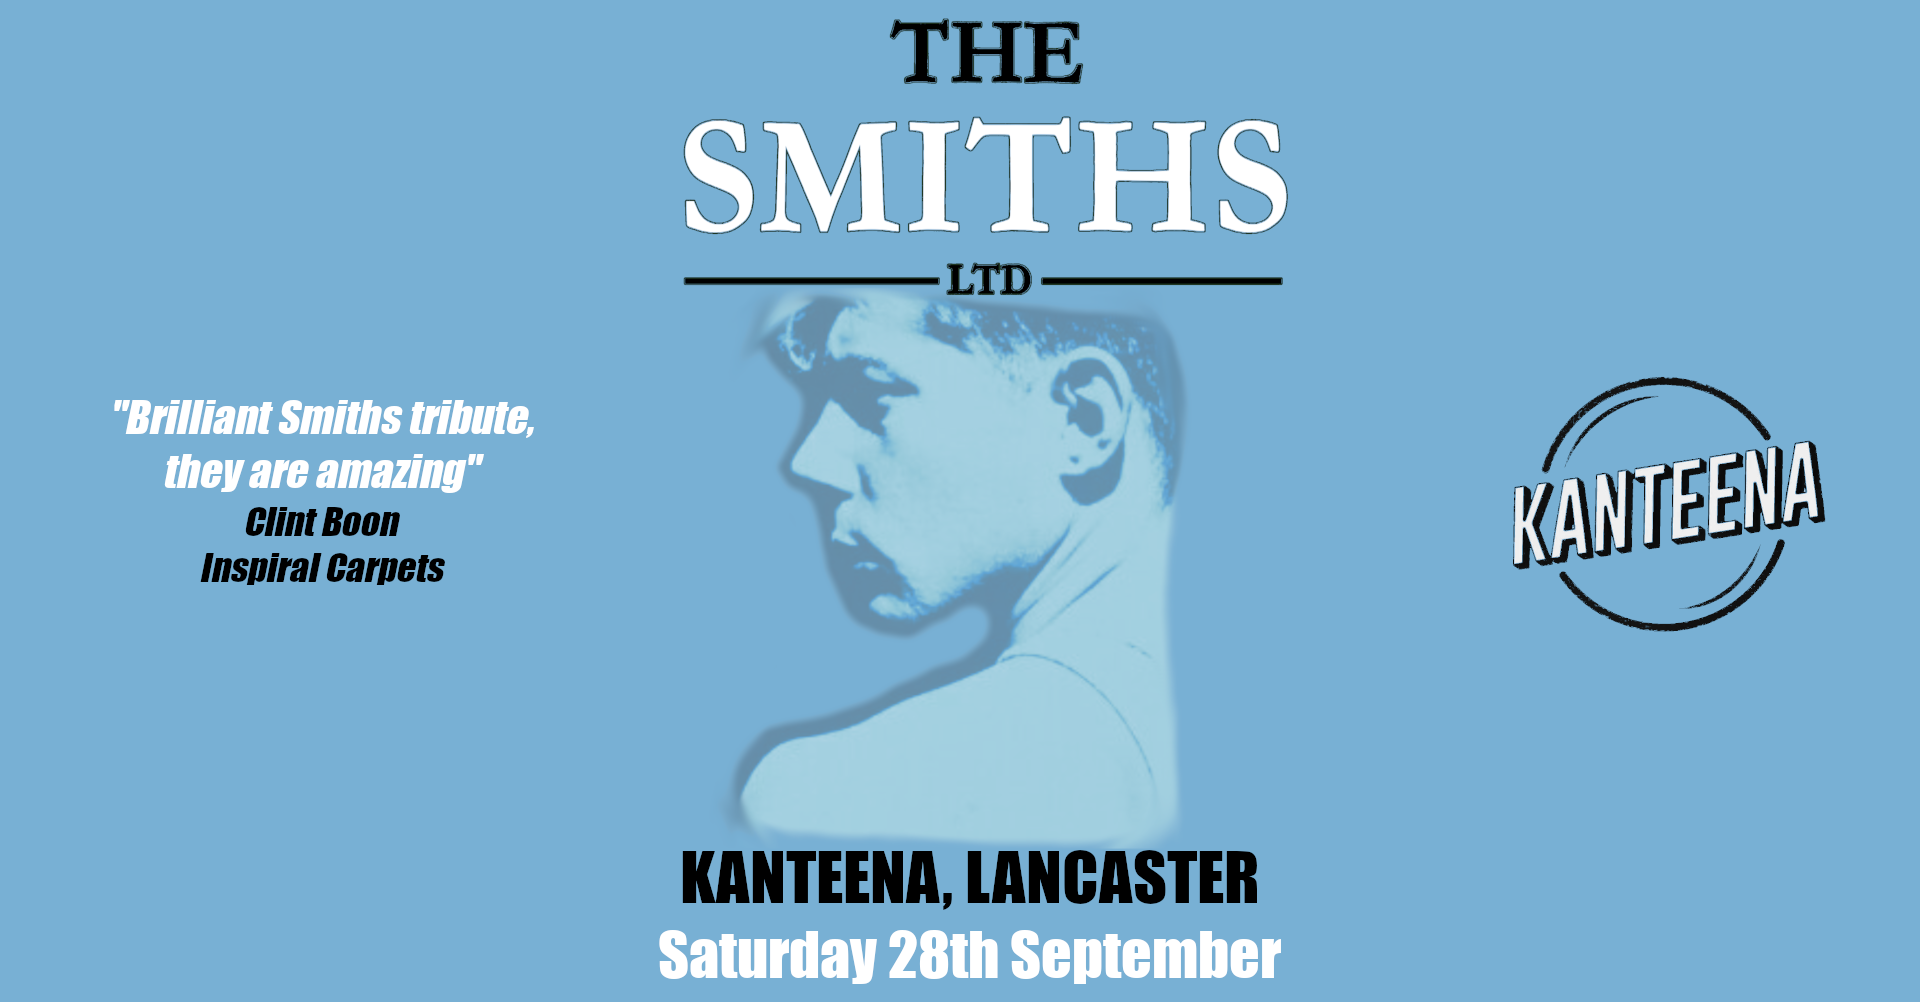 The Smiths Ltd & Support